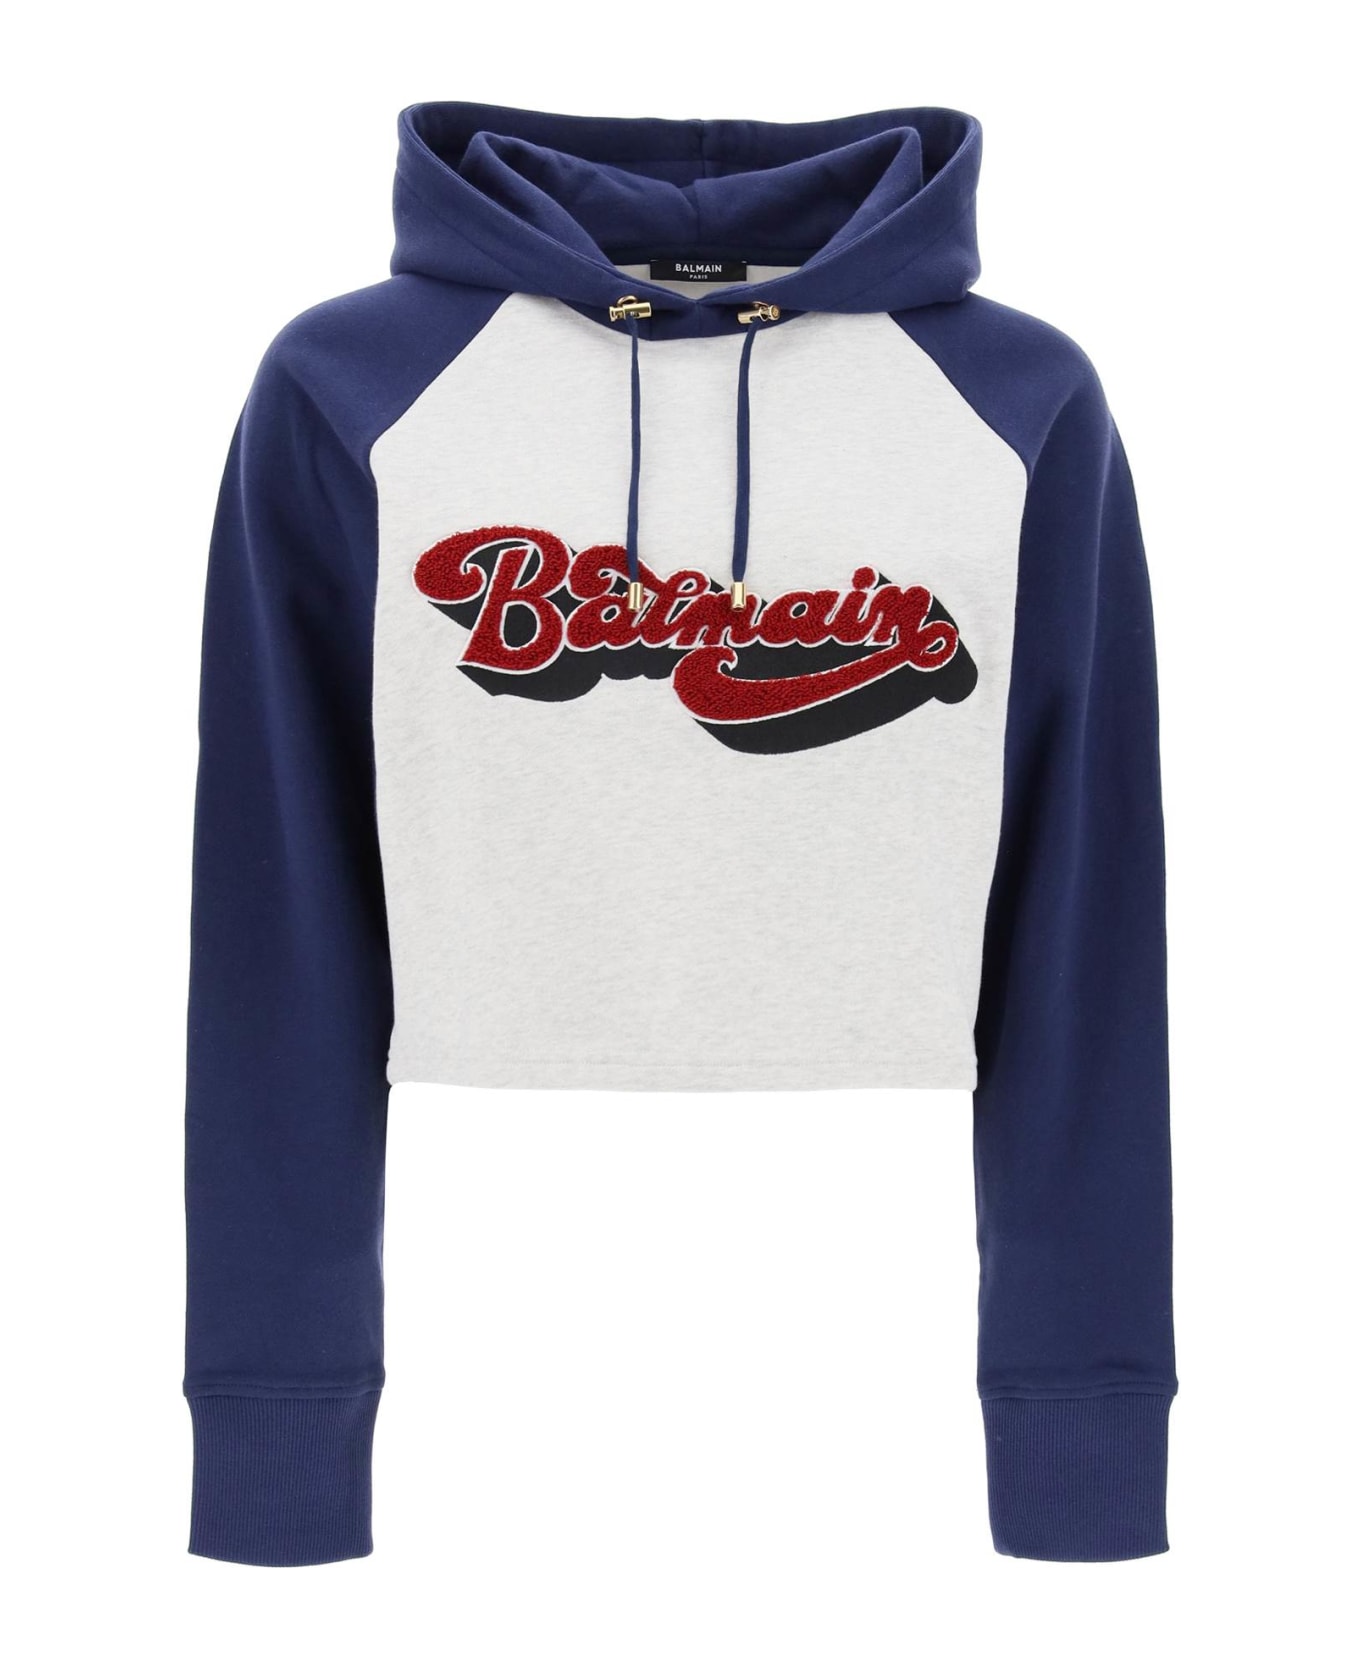 Balmain 70's Cropped Hoodie - GRIS CHINE MARINE ROUGE FONCE (Blue)